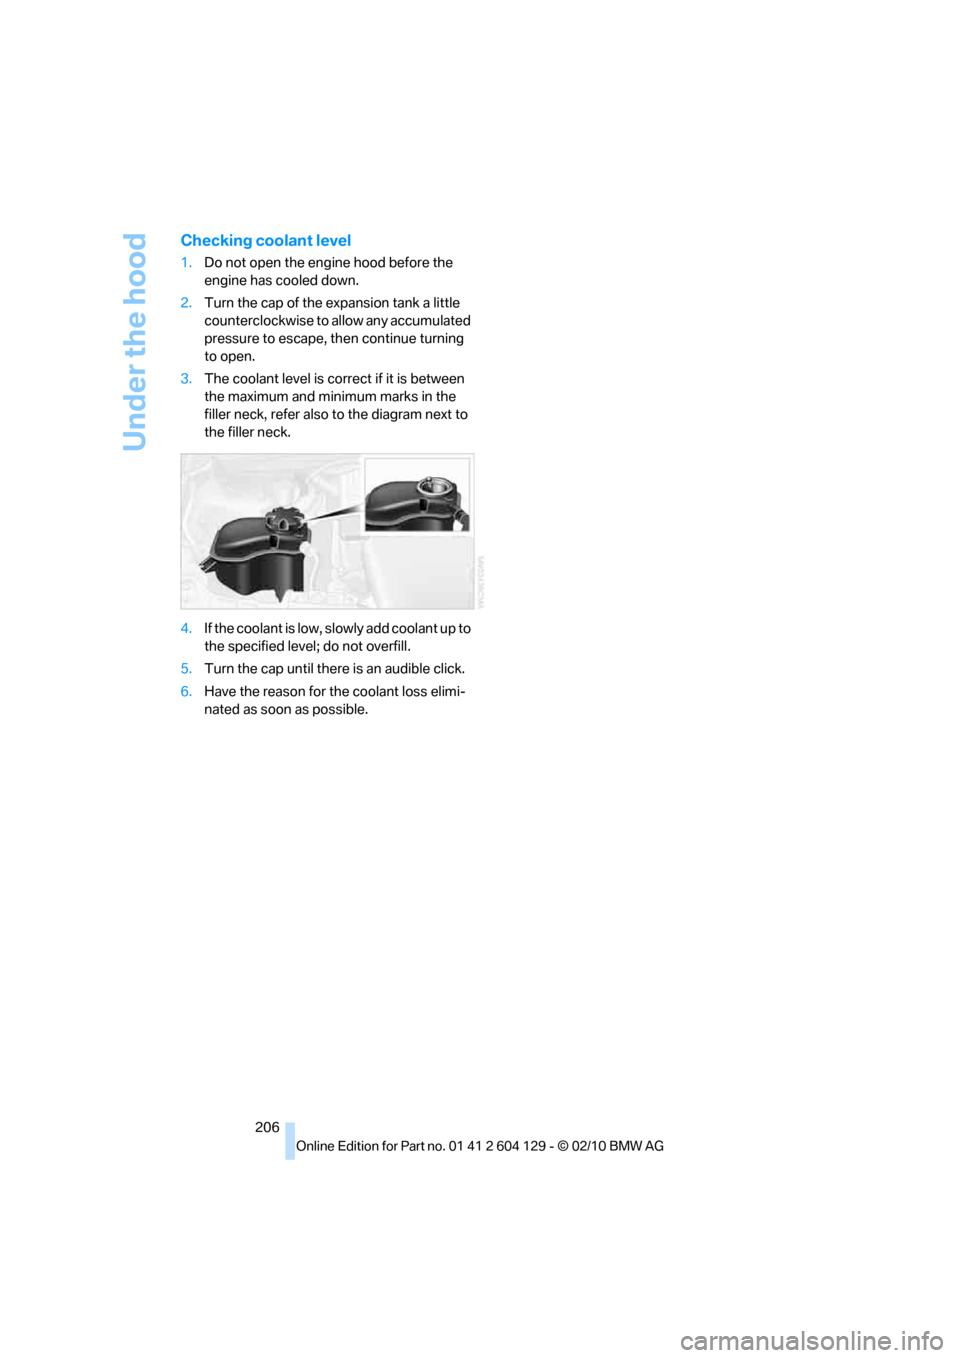 BMW 135I COUPE 2011 E82 Owners Manual Under the hood
206
Checking coolant level
1.Do not open the engine hood before the 
engine has cooled down.
2.Turn the cap of the expansion tank a little 
counterclockwise to allow any accumulated 
pr